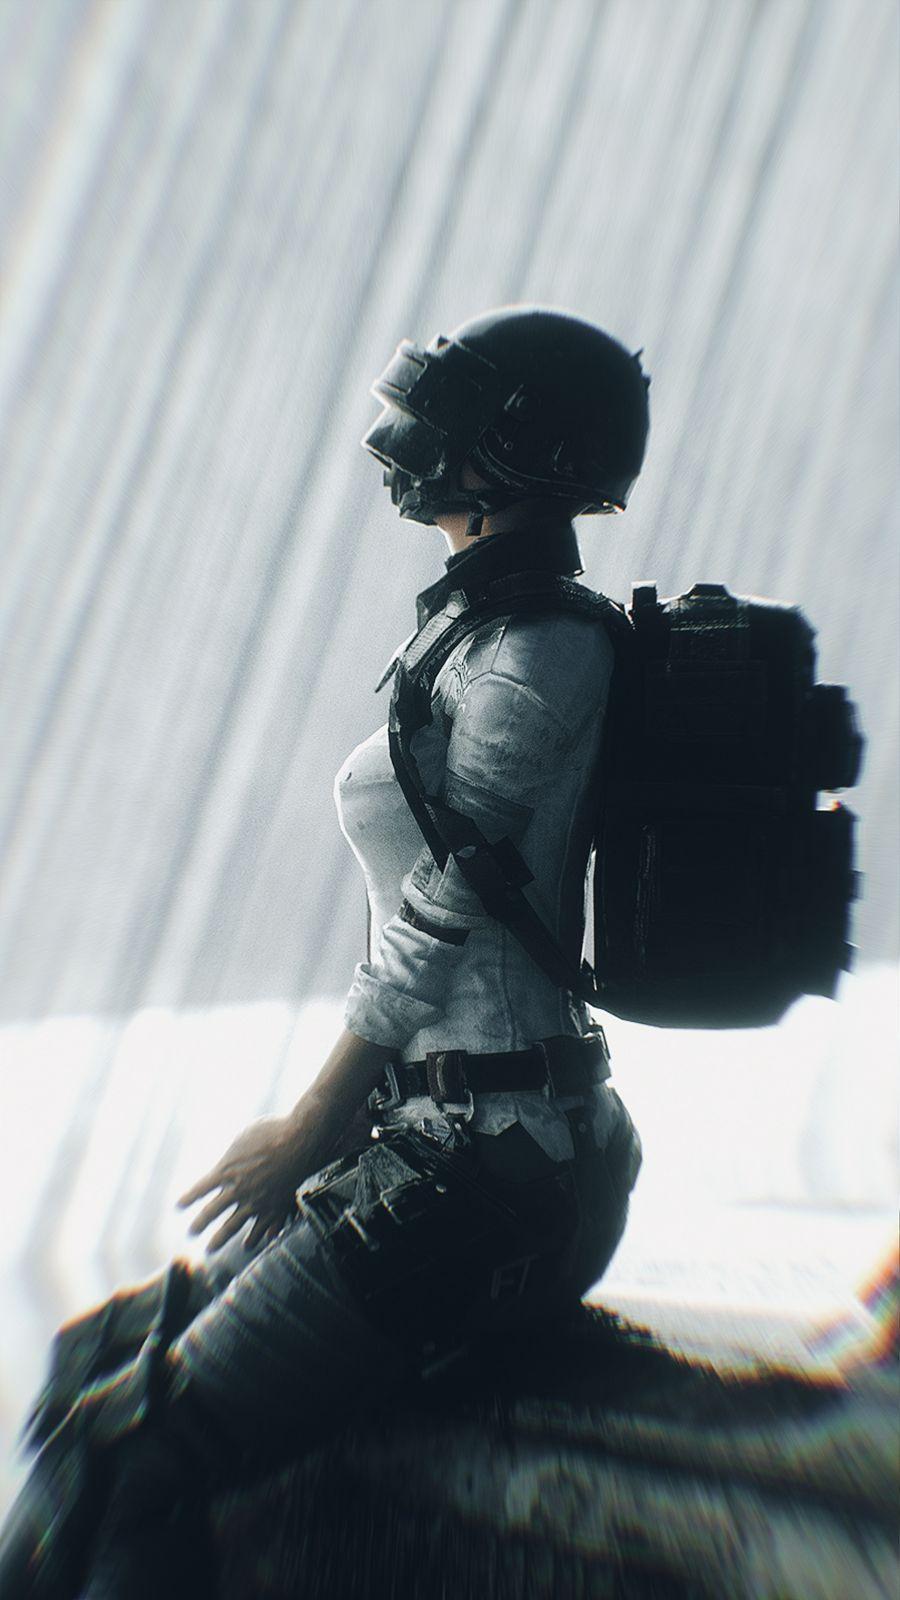  4K  PUBG  Wallpaper  2021 for Android  APK Download